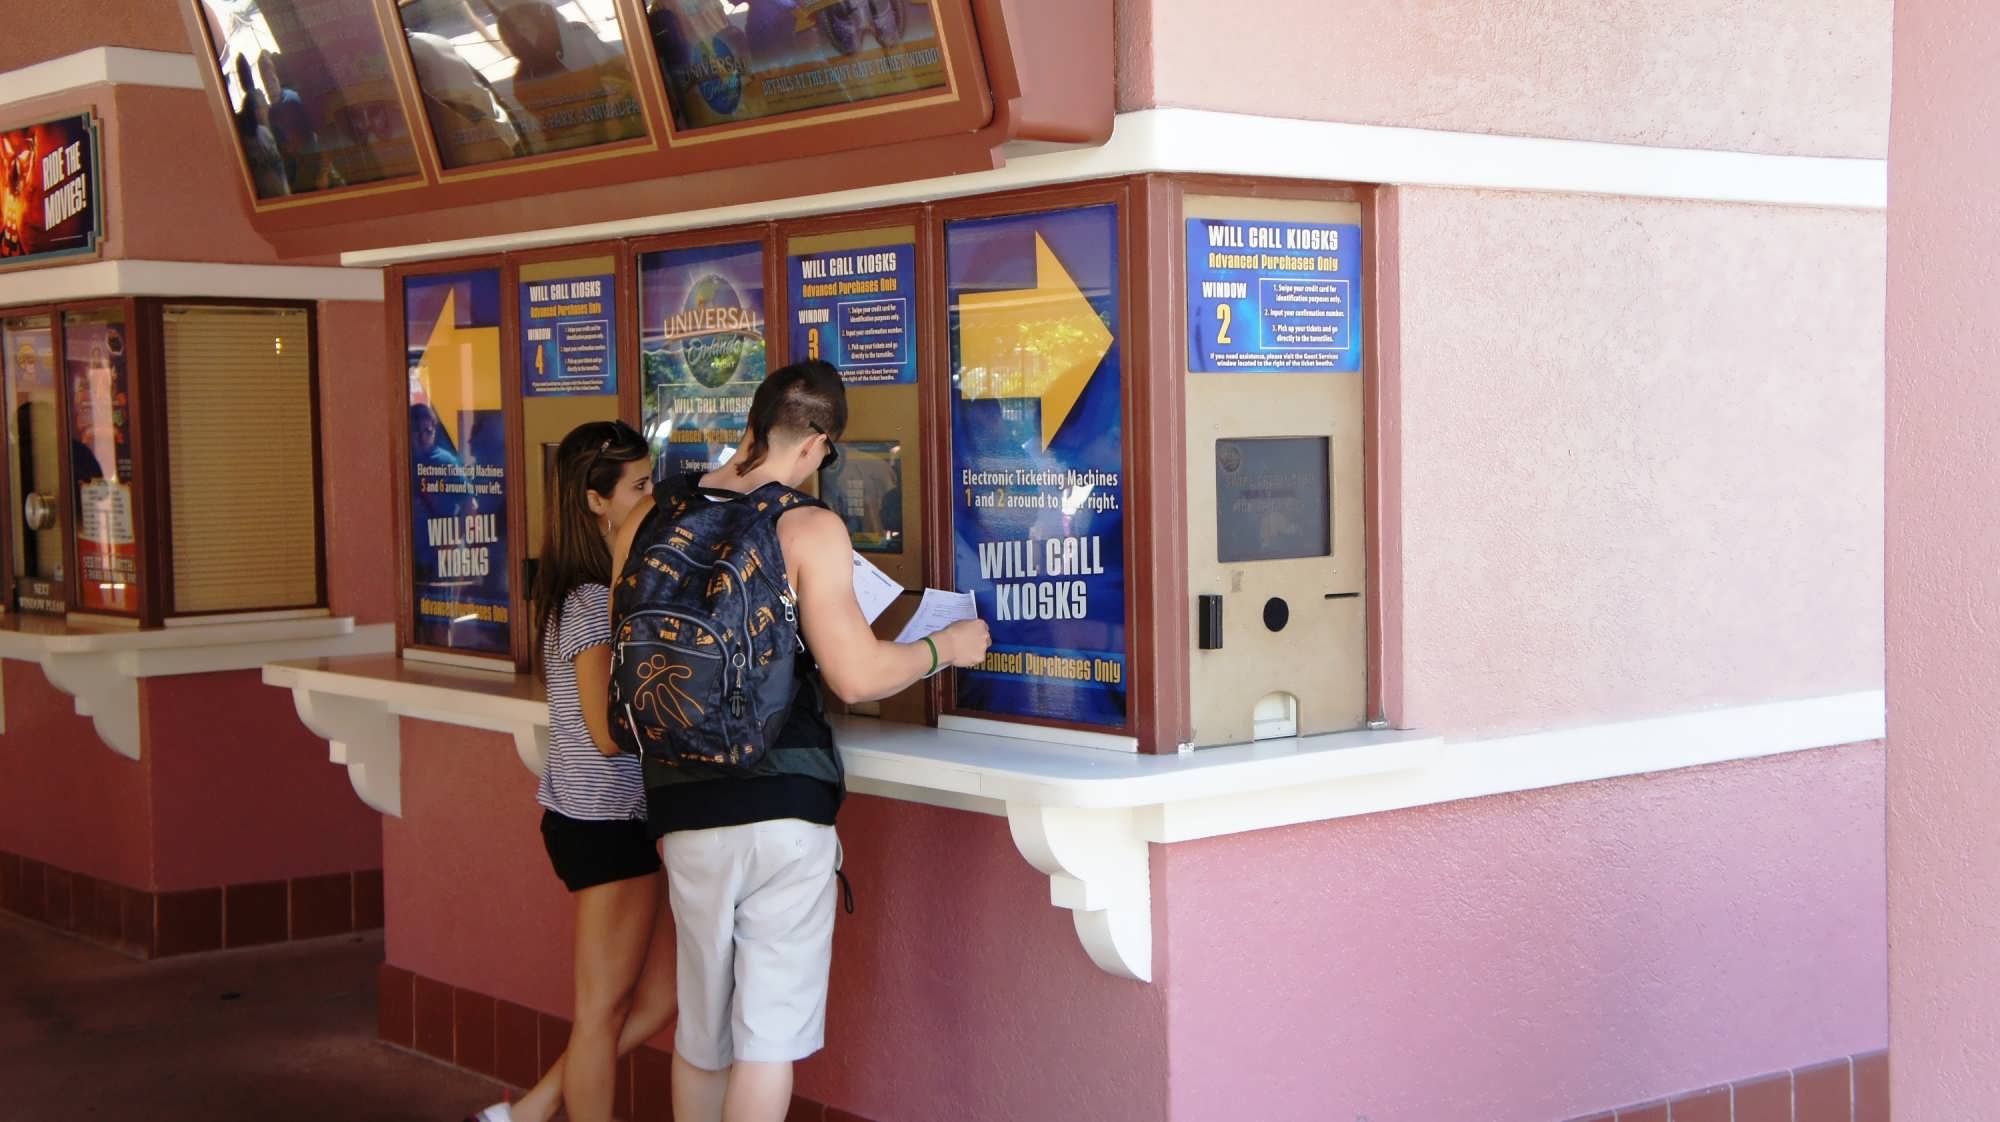 Guests pick up tickets before entering Universal Studios Florida